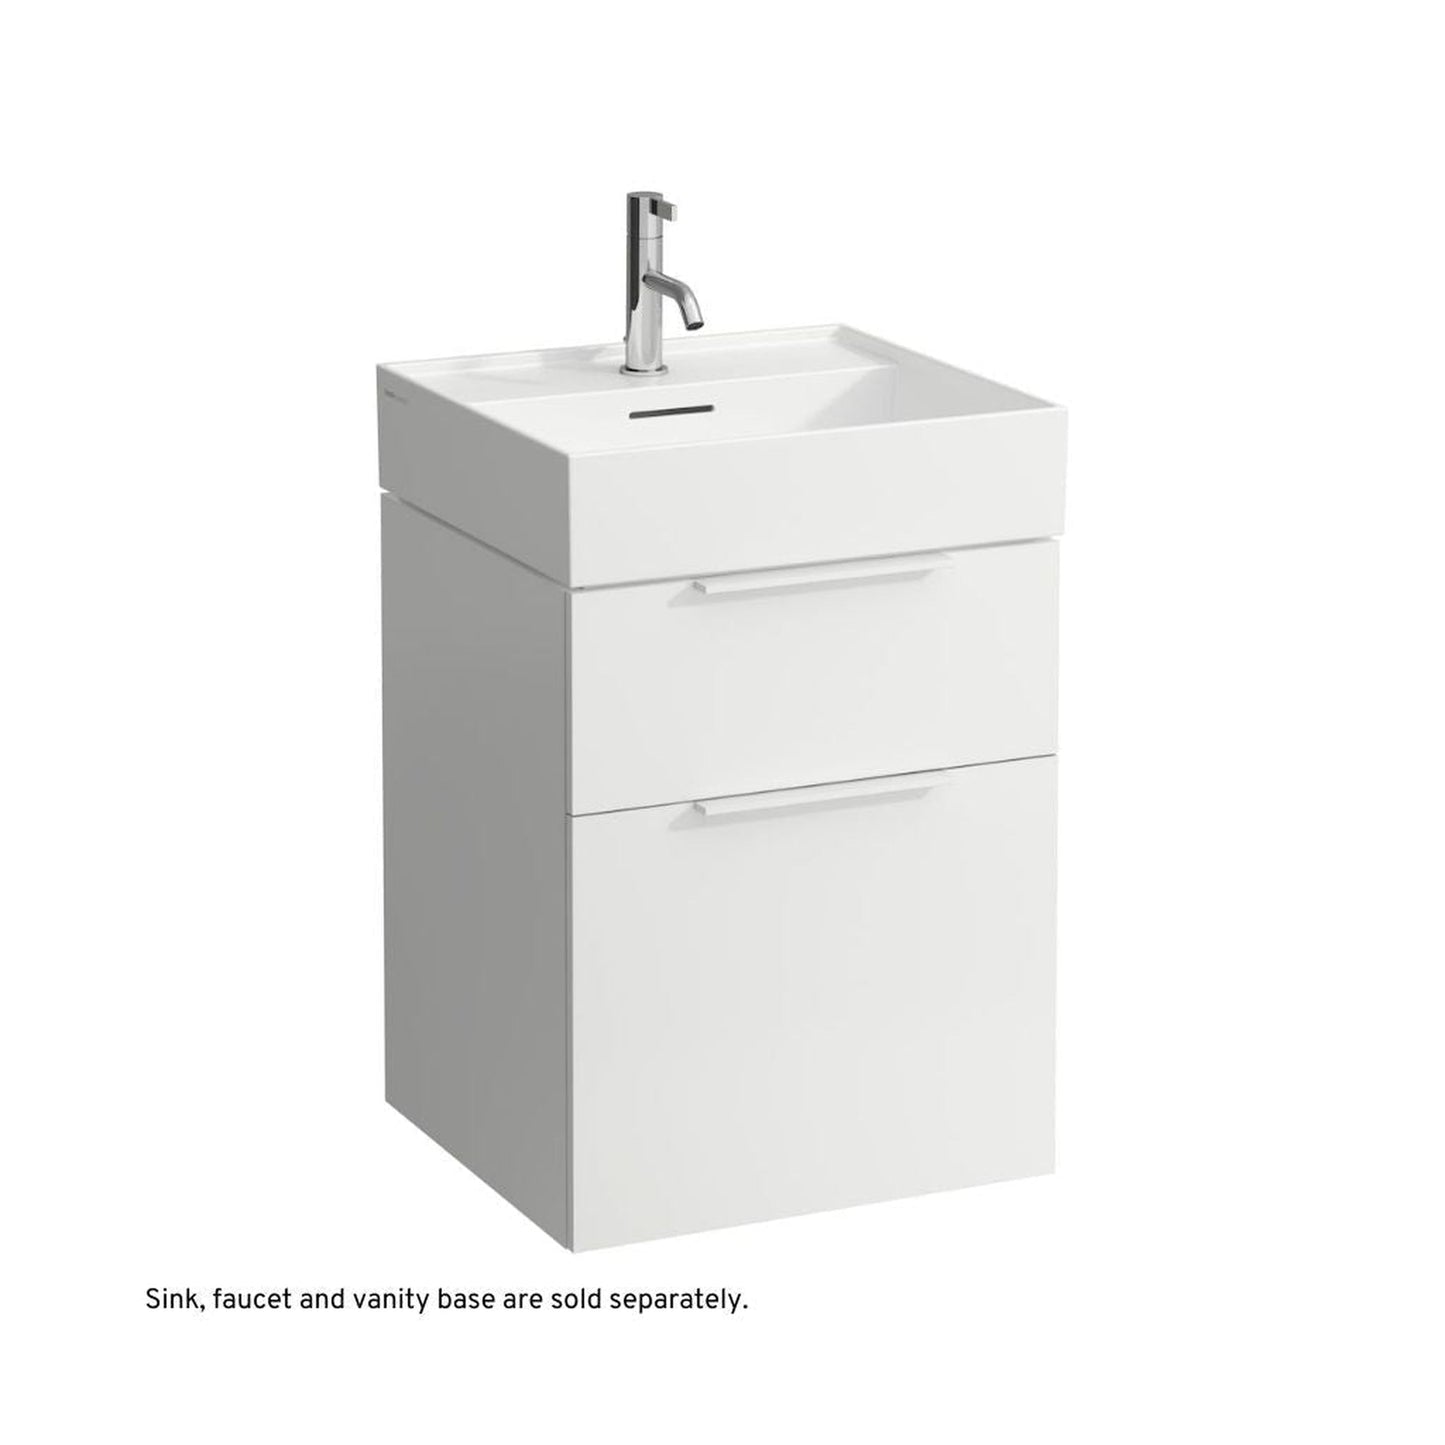 Laufen Kartell 20" x 18" Matte White Wall-Mounted Bathroom Sink With Faucet Hole